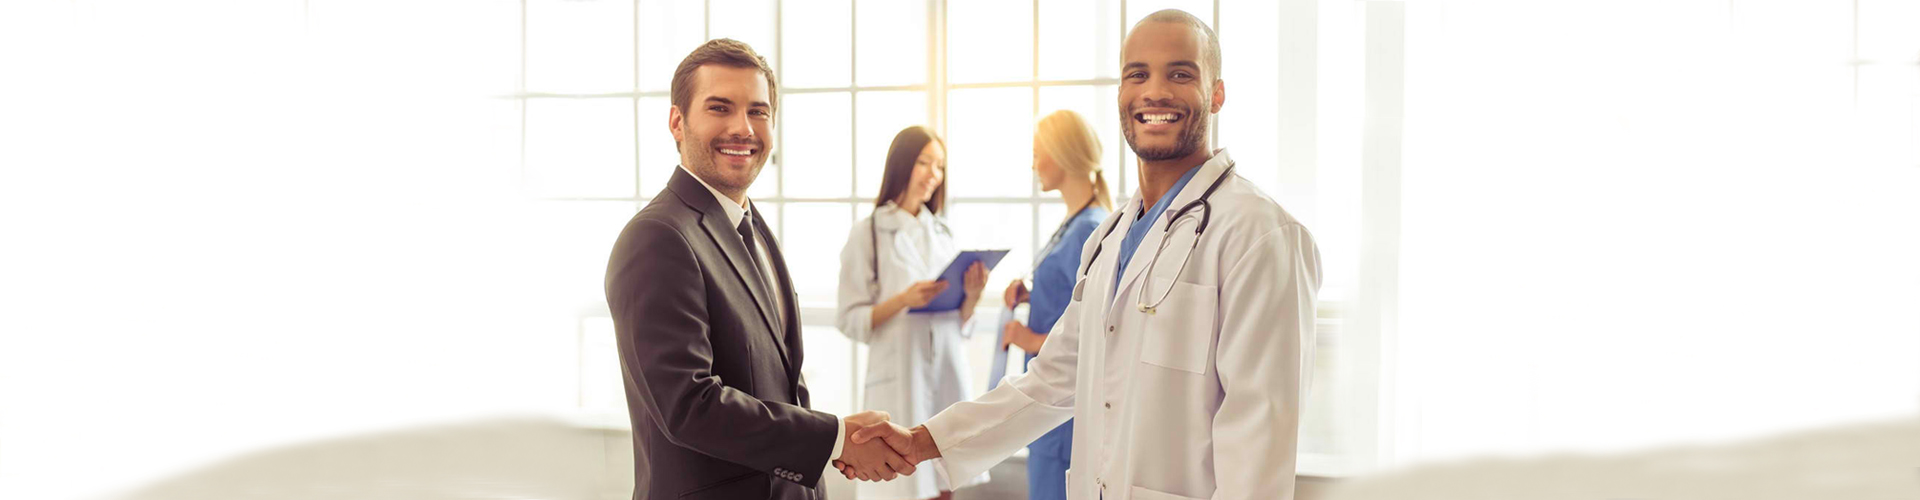 man in business attire shaking hands with a healthcare staff